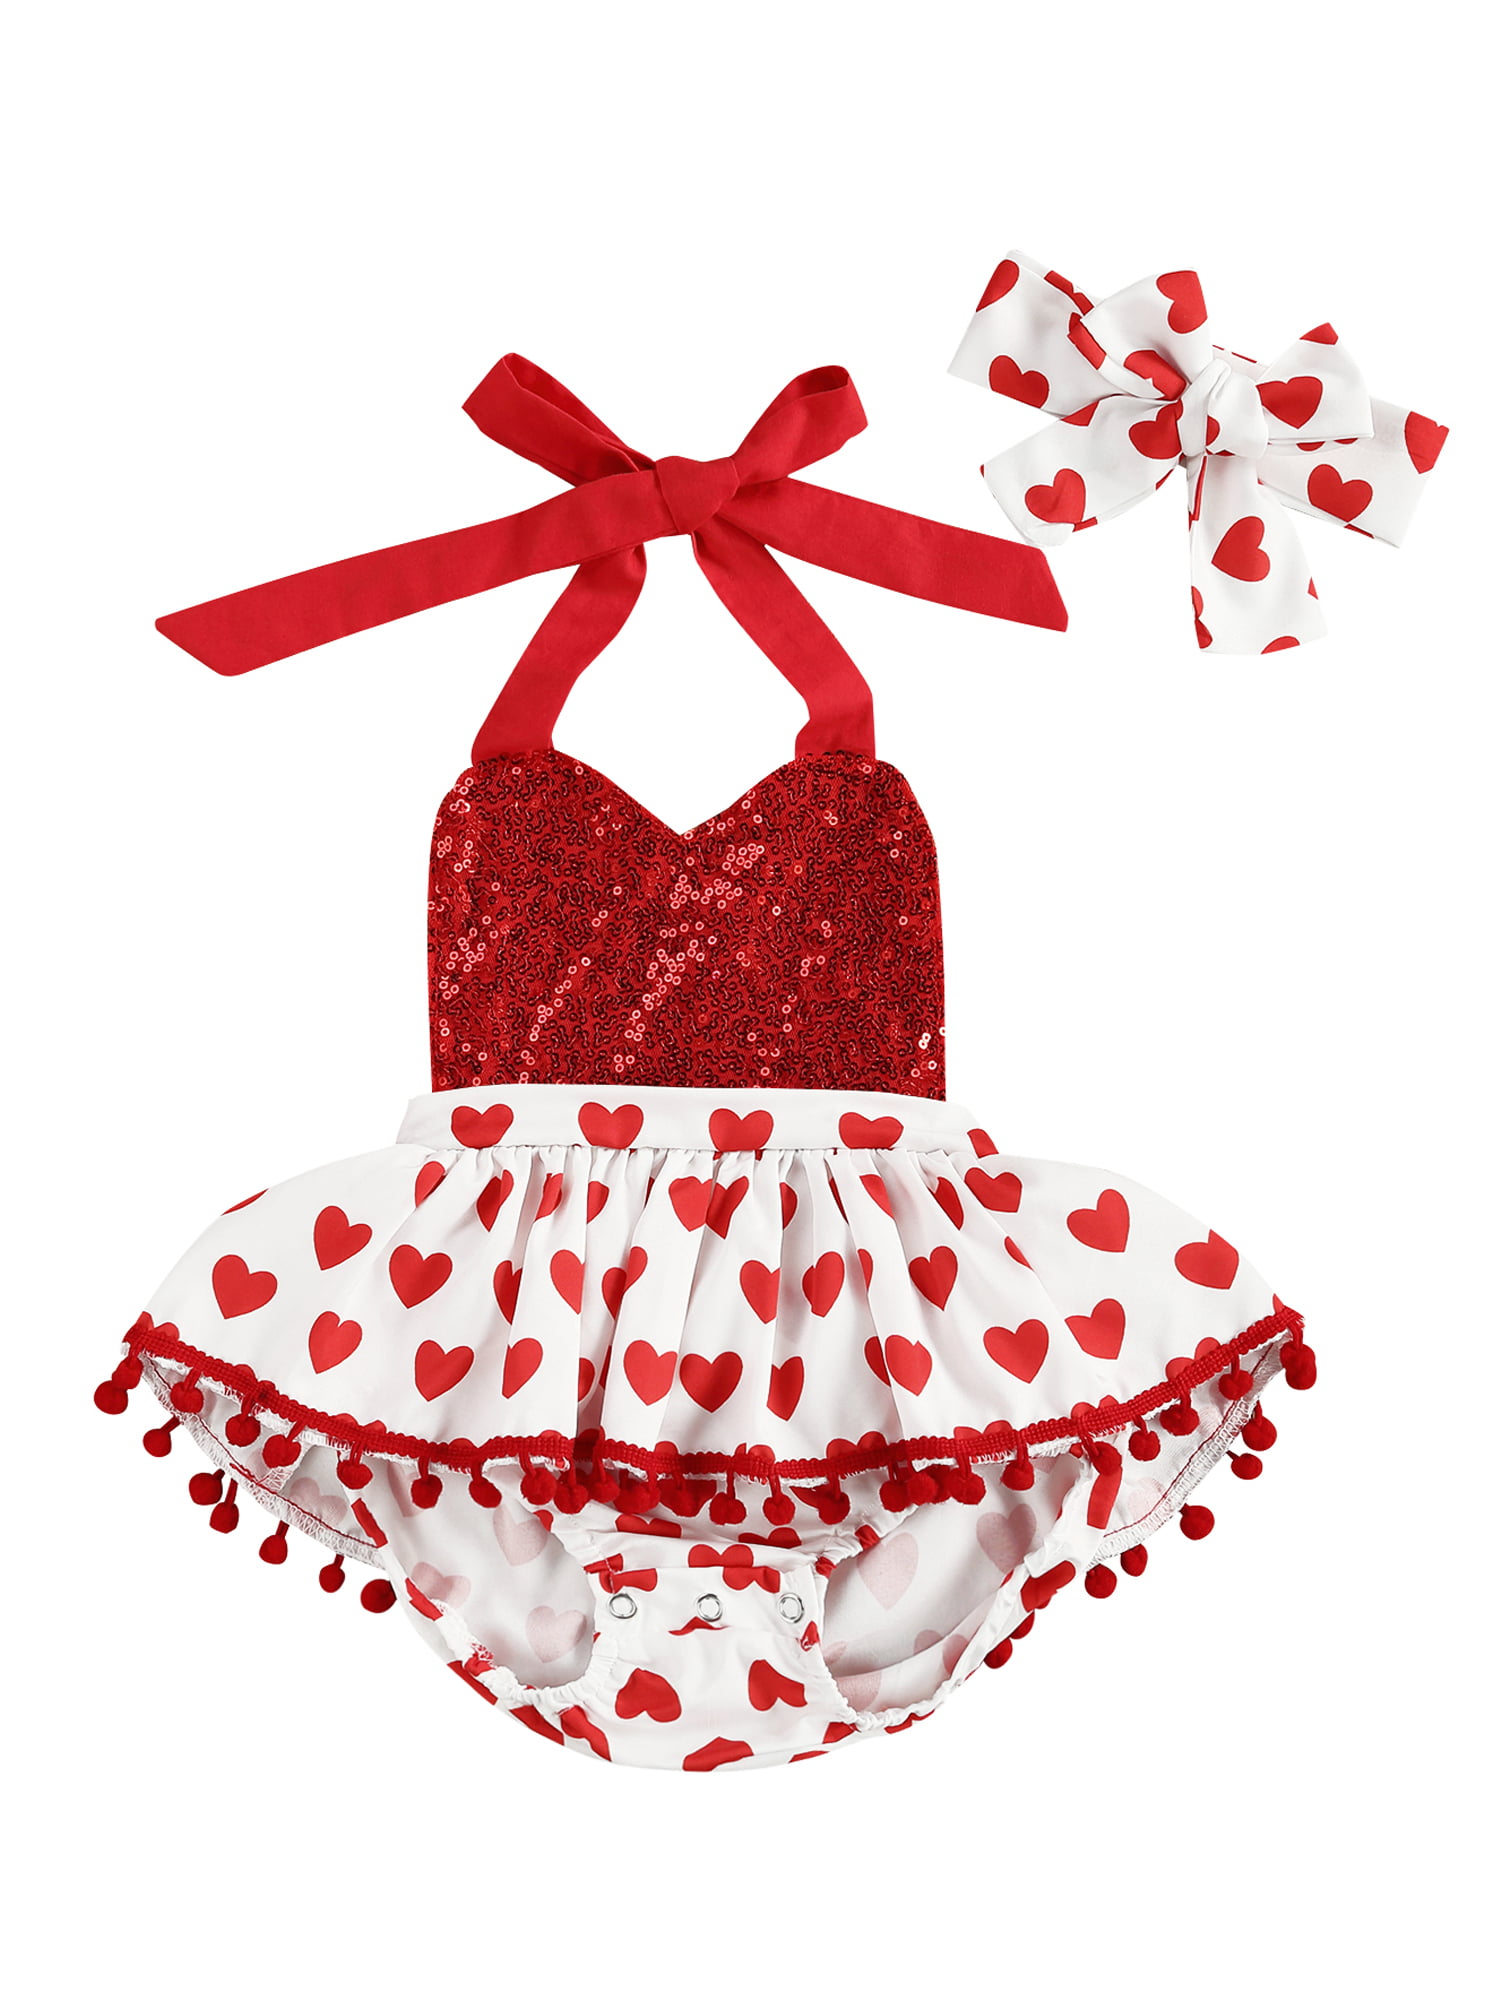 Details about   Carter's Just One You Baby Girl One Piece Romper With Headband 